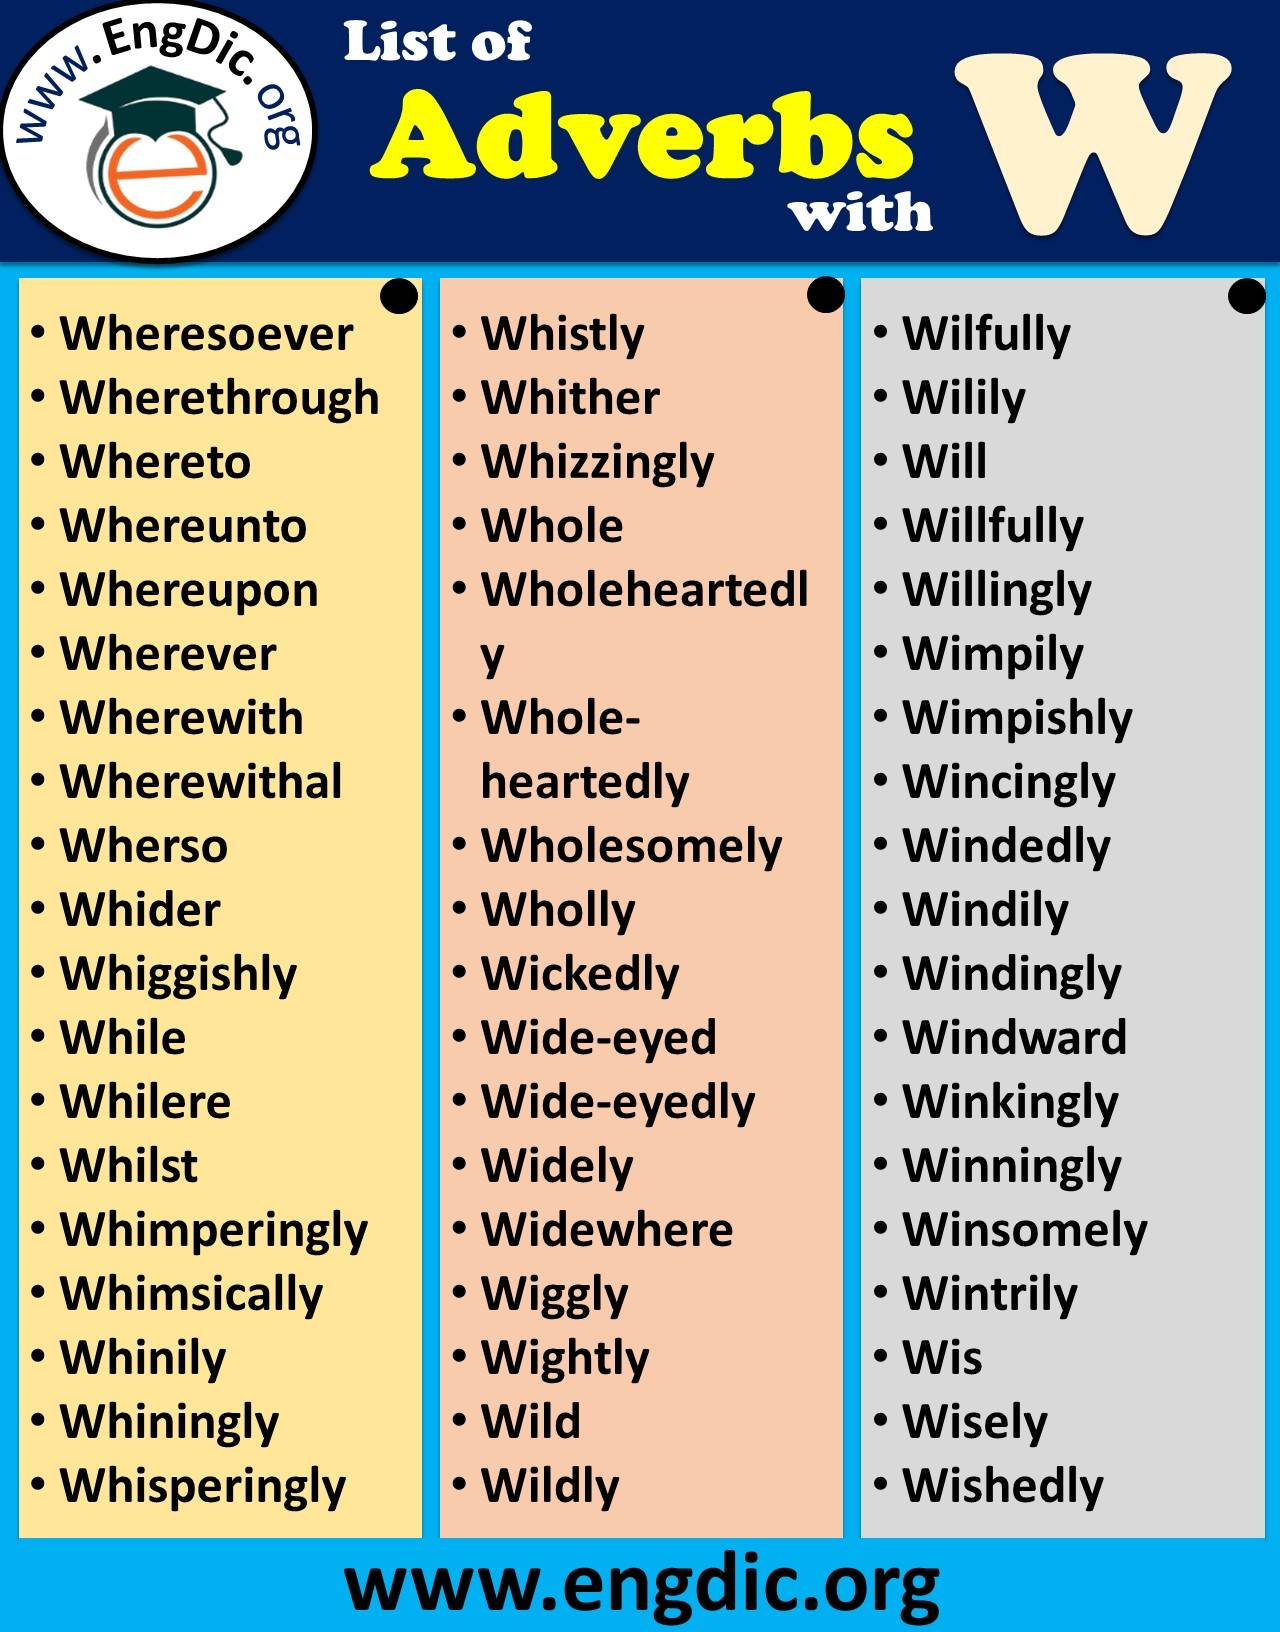 Adverbs starting with W to describe someone Positively PDF